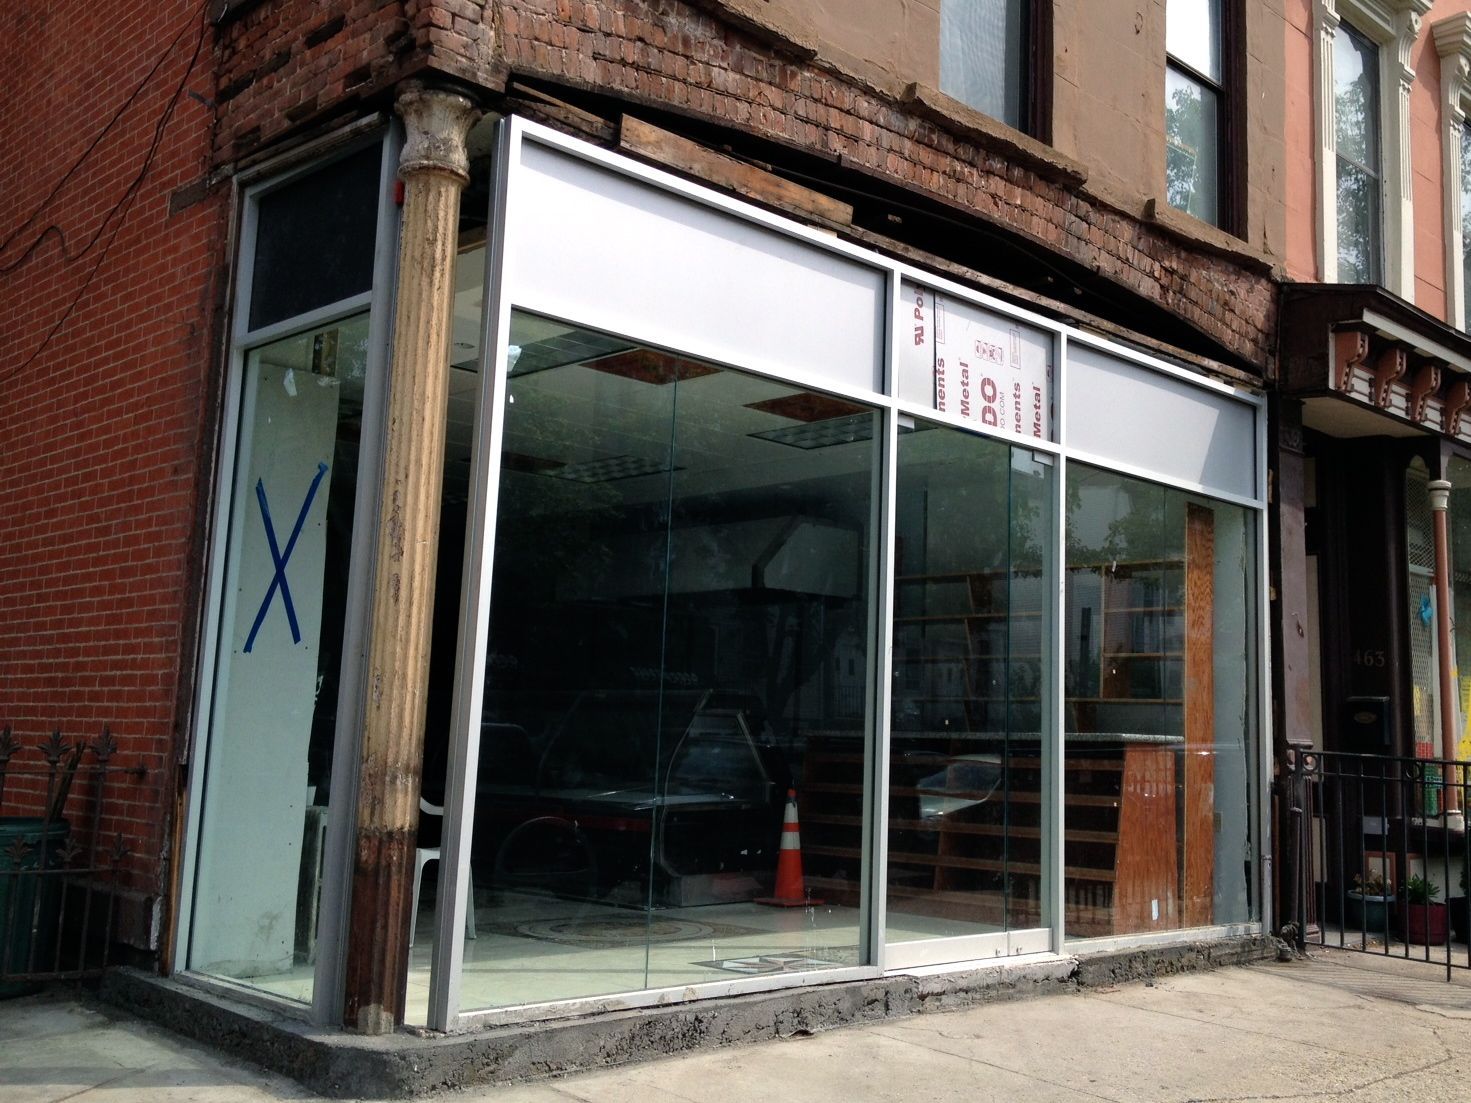 New Deli Replacing Old One On 6th Avenue?